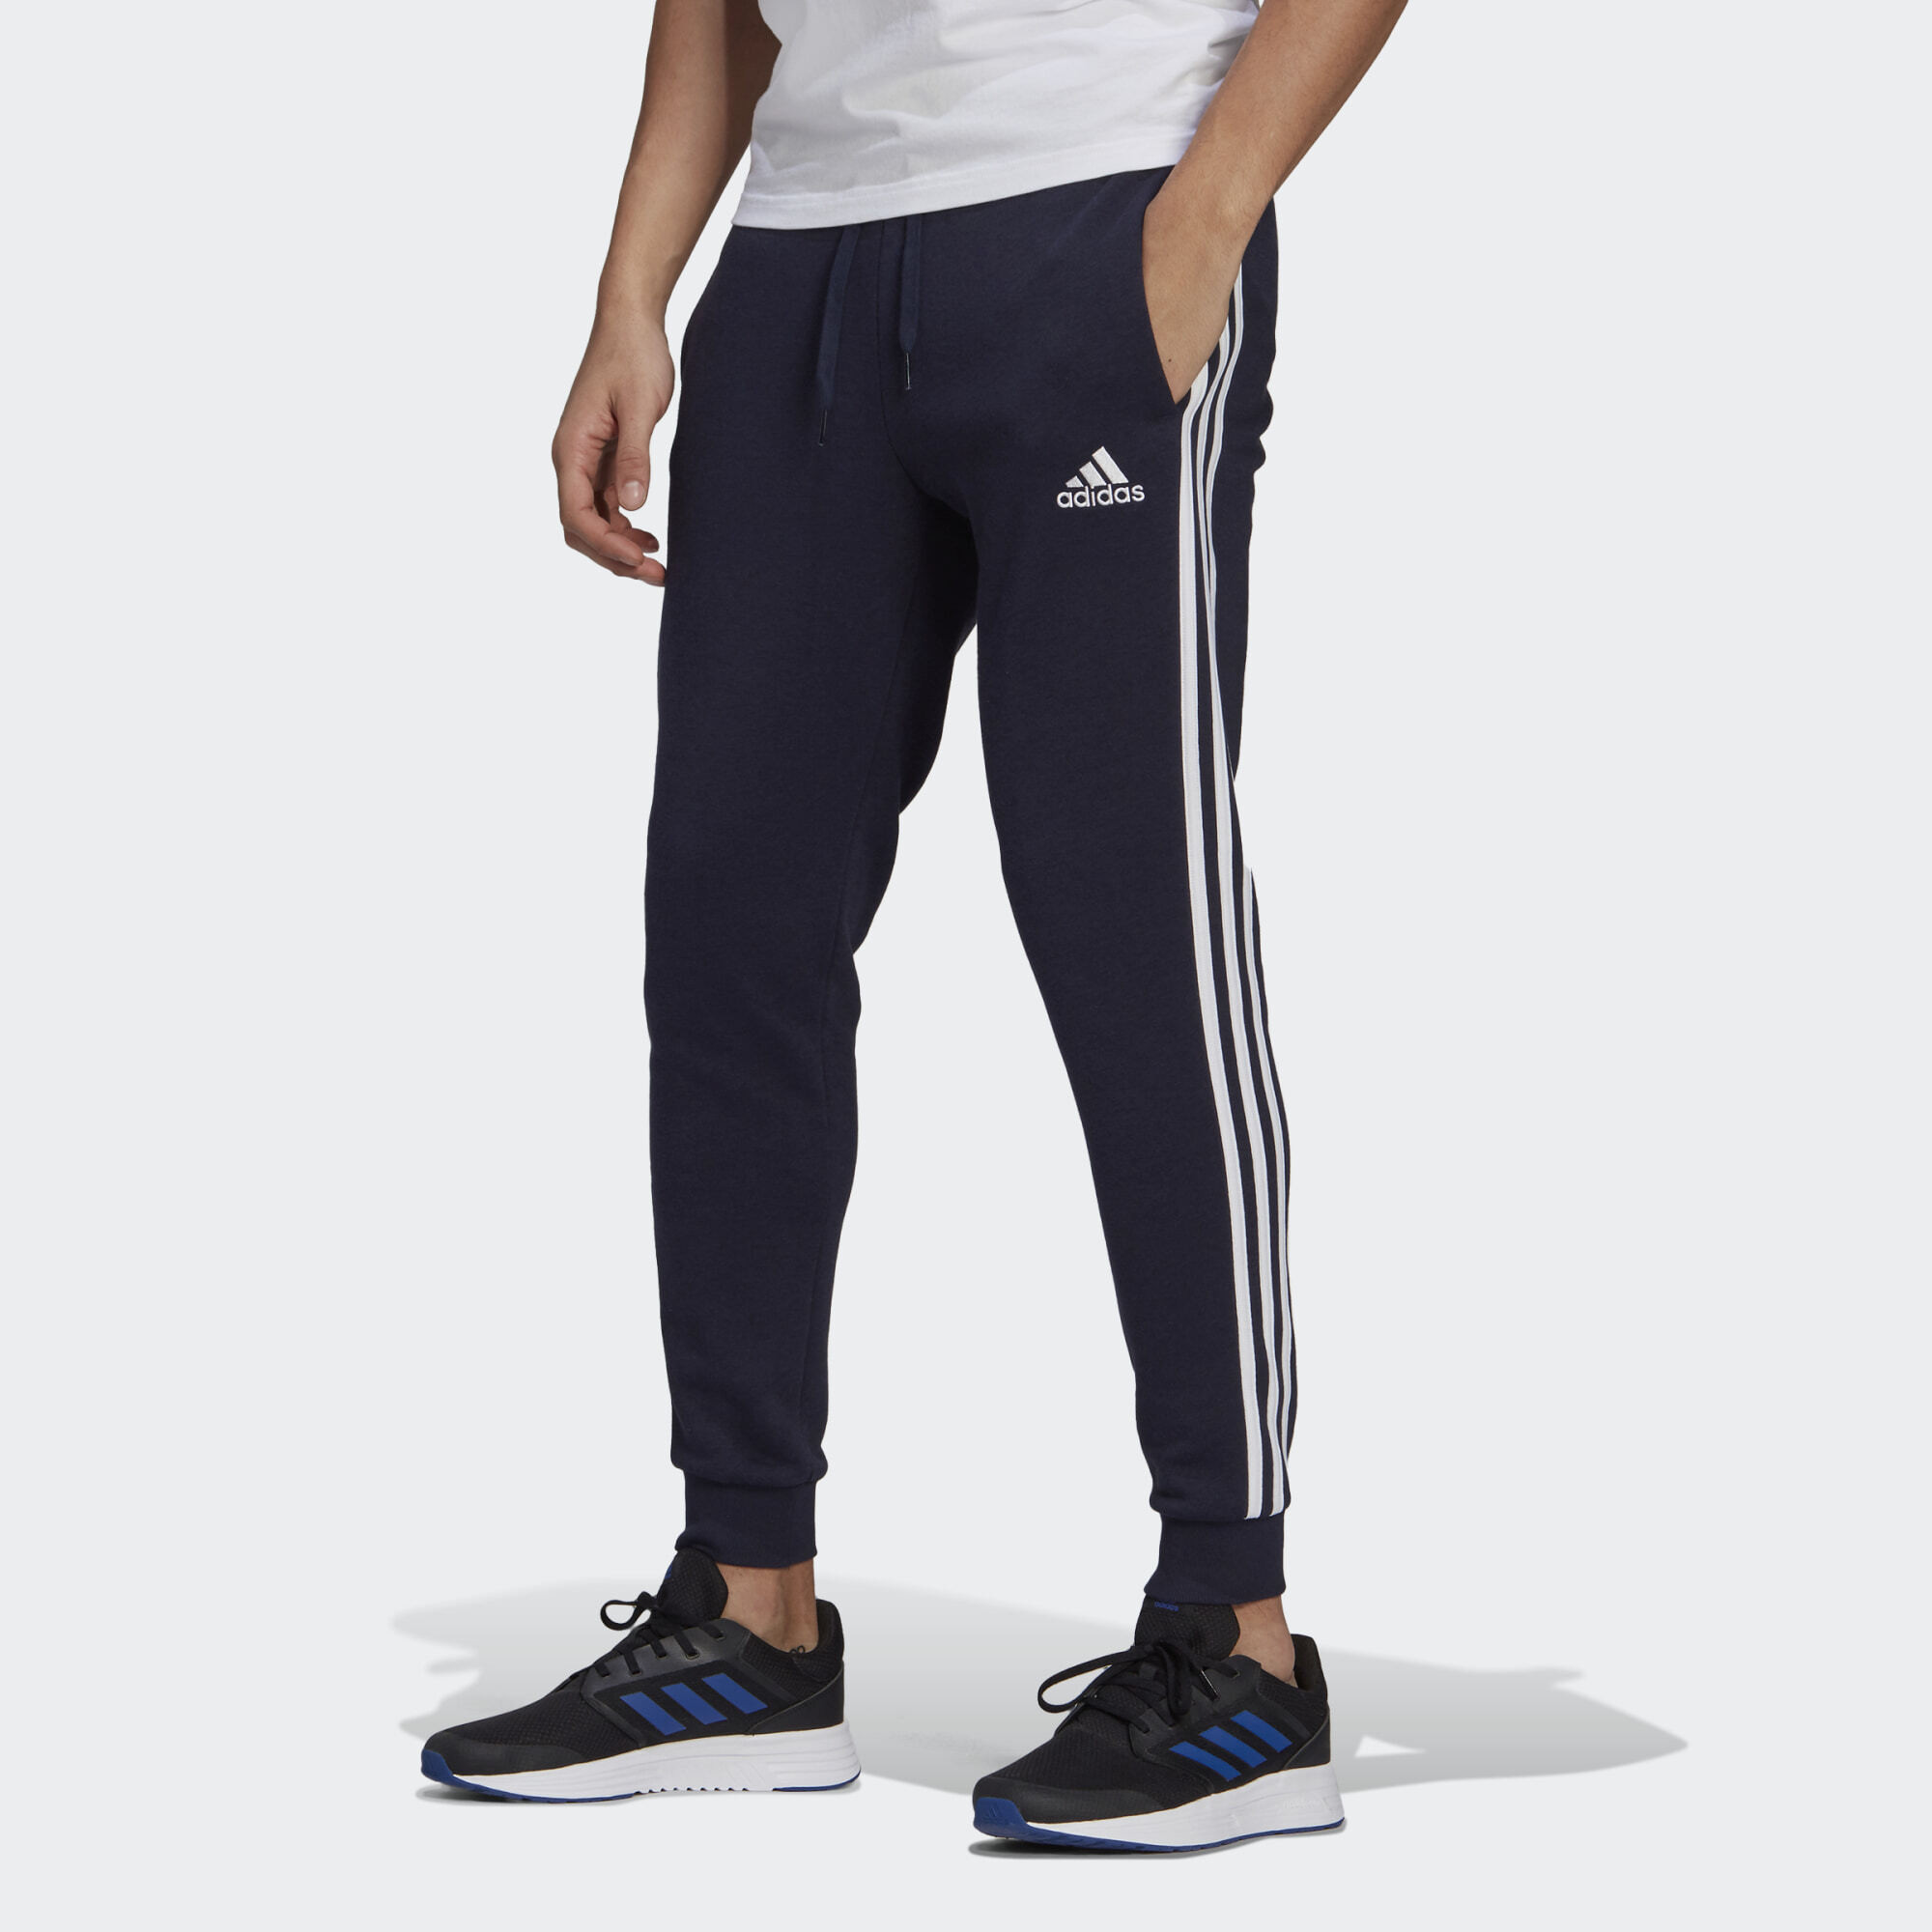 adidas Essentials Fleece Fitted 3-Stripes Pants (9000133352_62935)